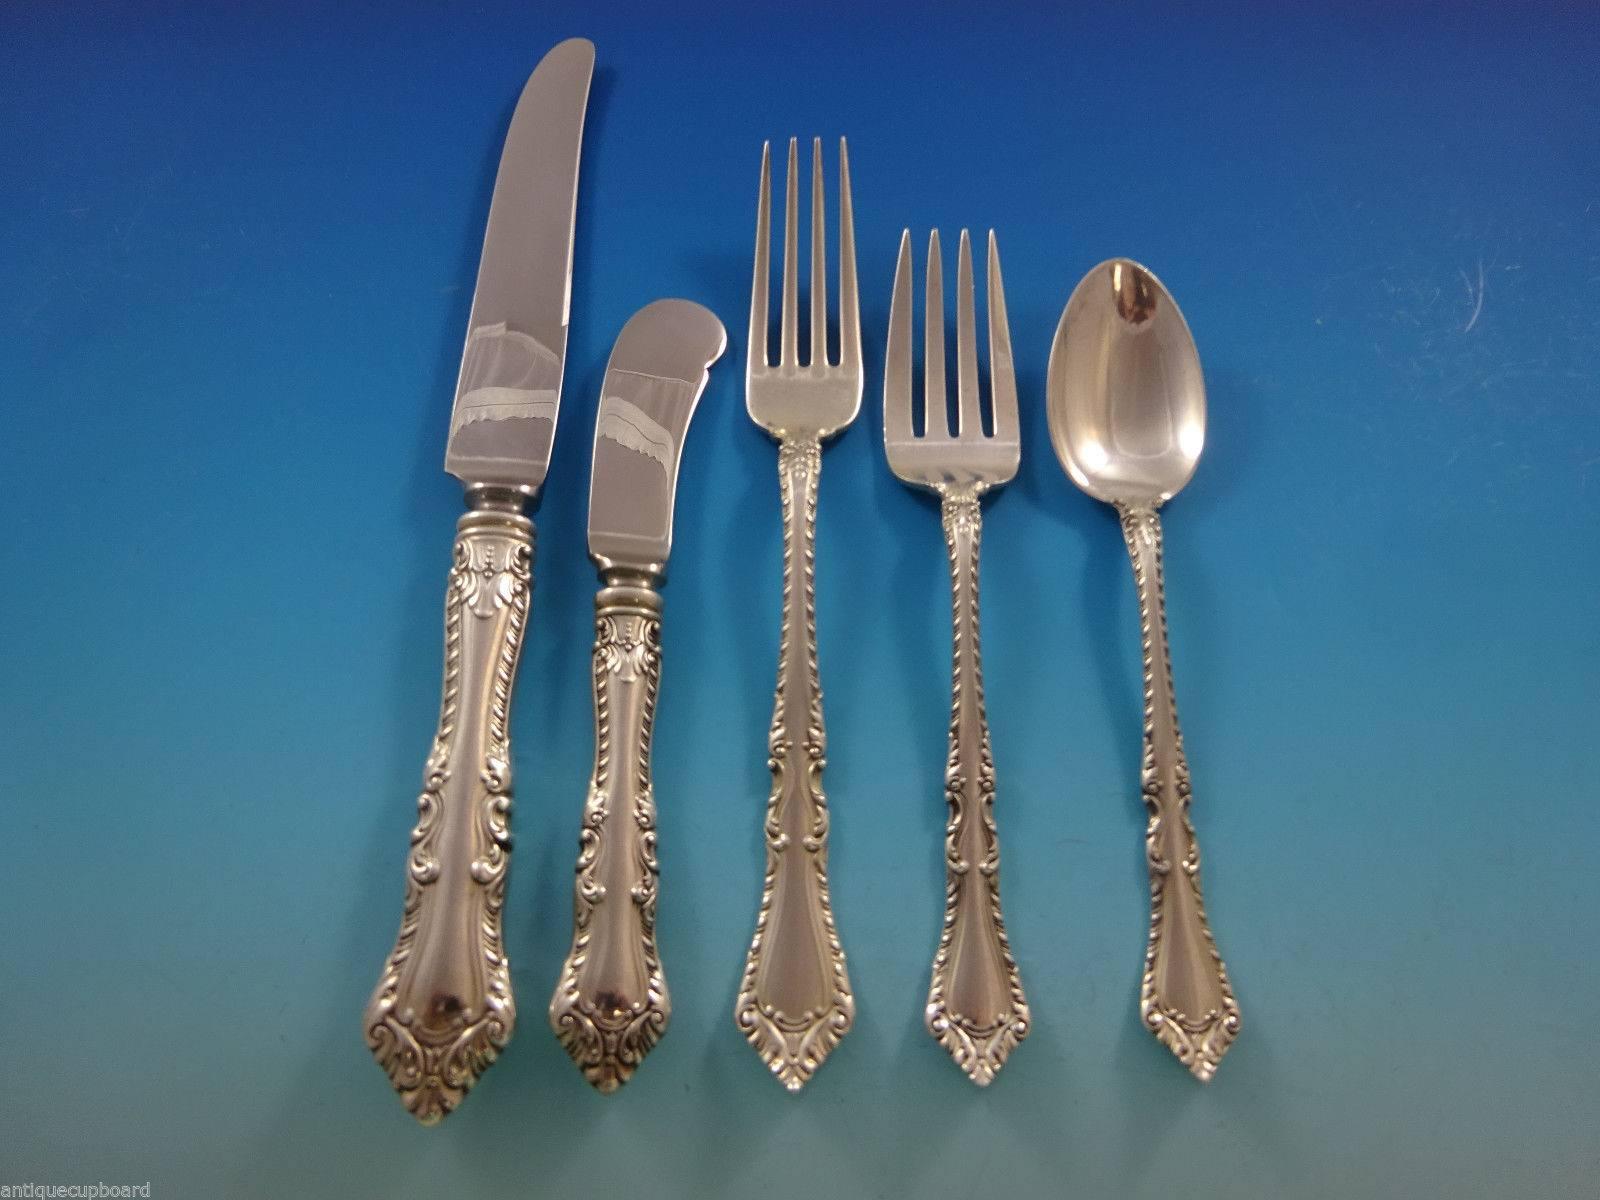 Foxhall by Watson sterling silver flatware set, 43 pieces. This set includes:

Eight knives, 9